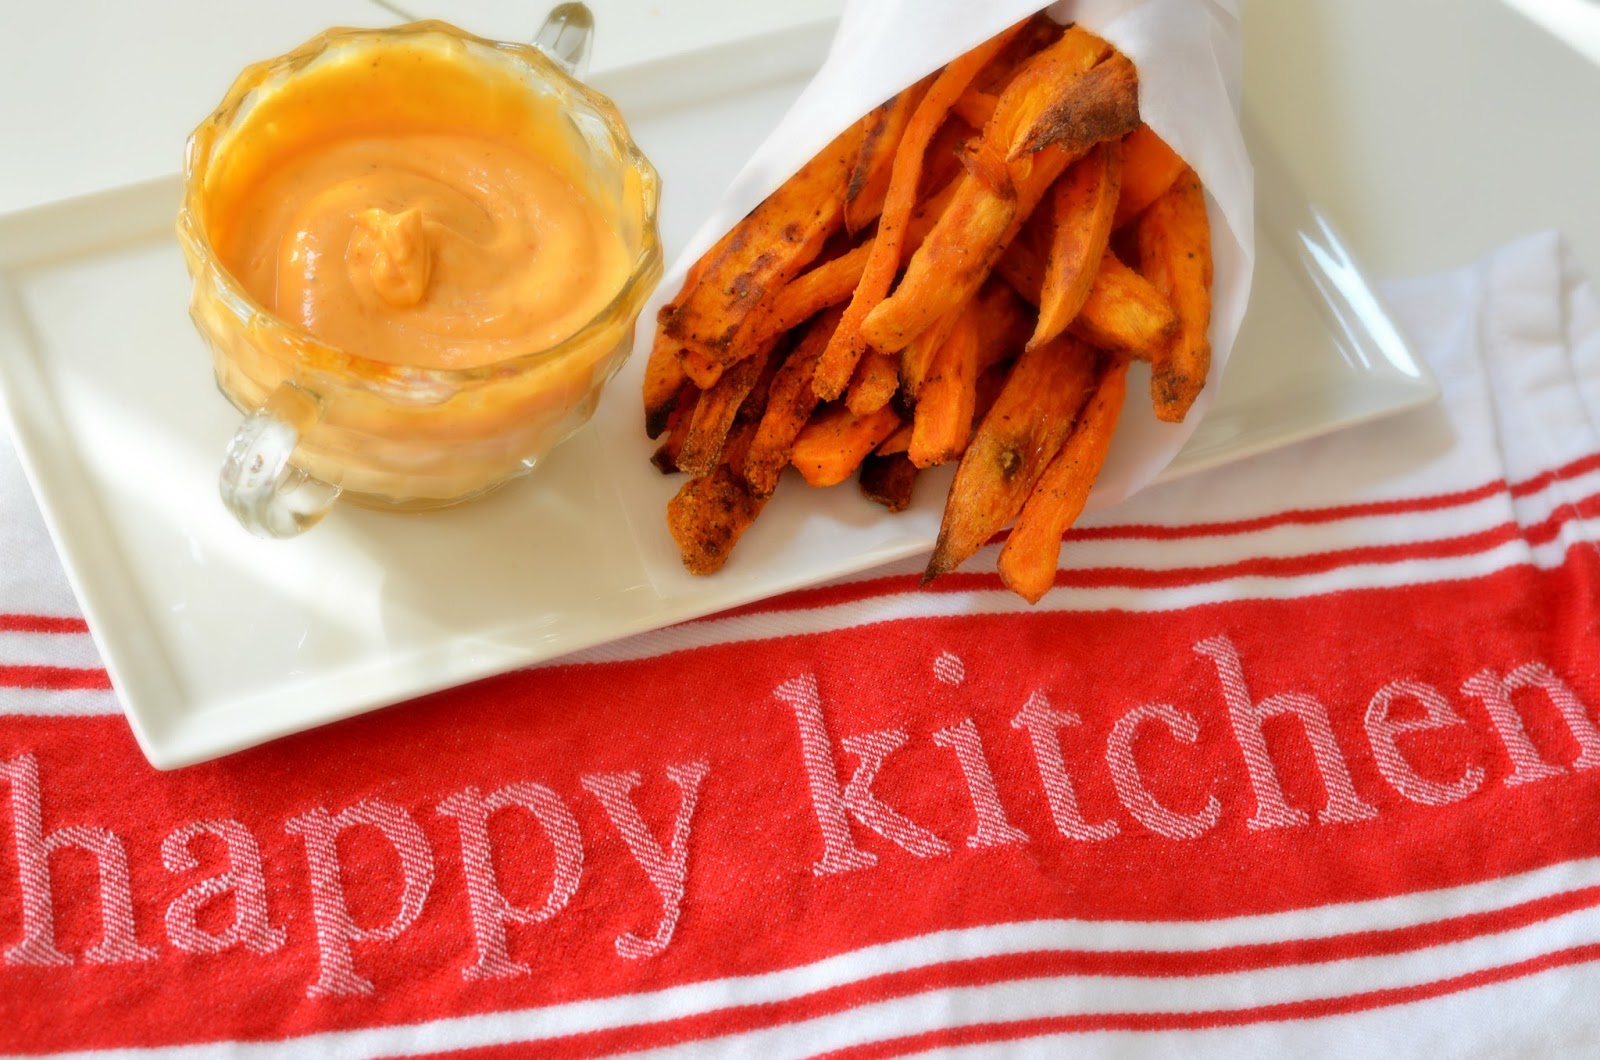 Oven-Baked-Truffle-Sweet-Potato-Fries-With-Spicy-Mayo-Dipping-Sauce